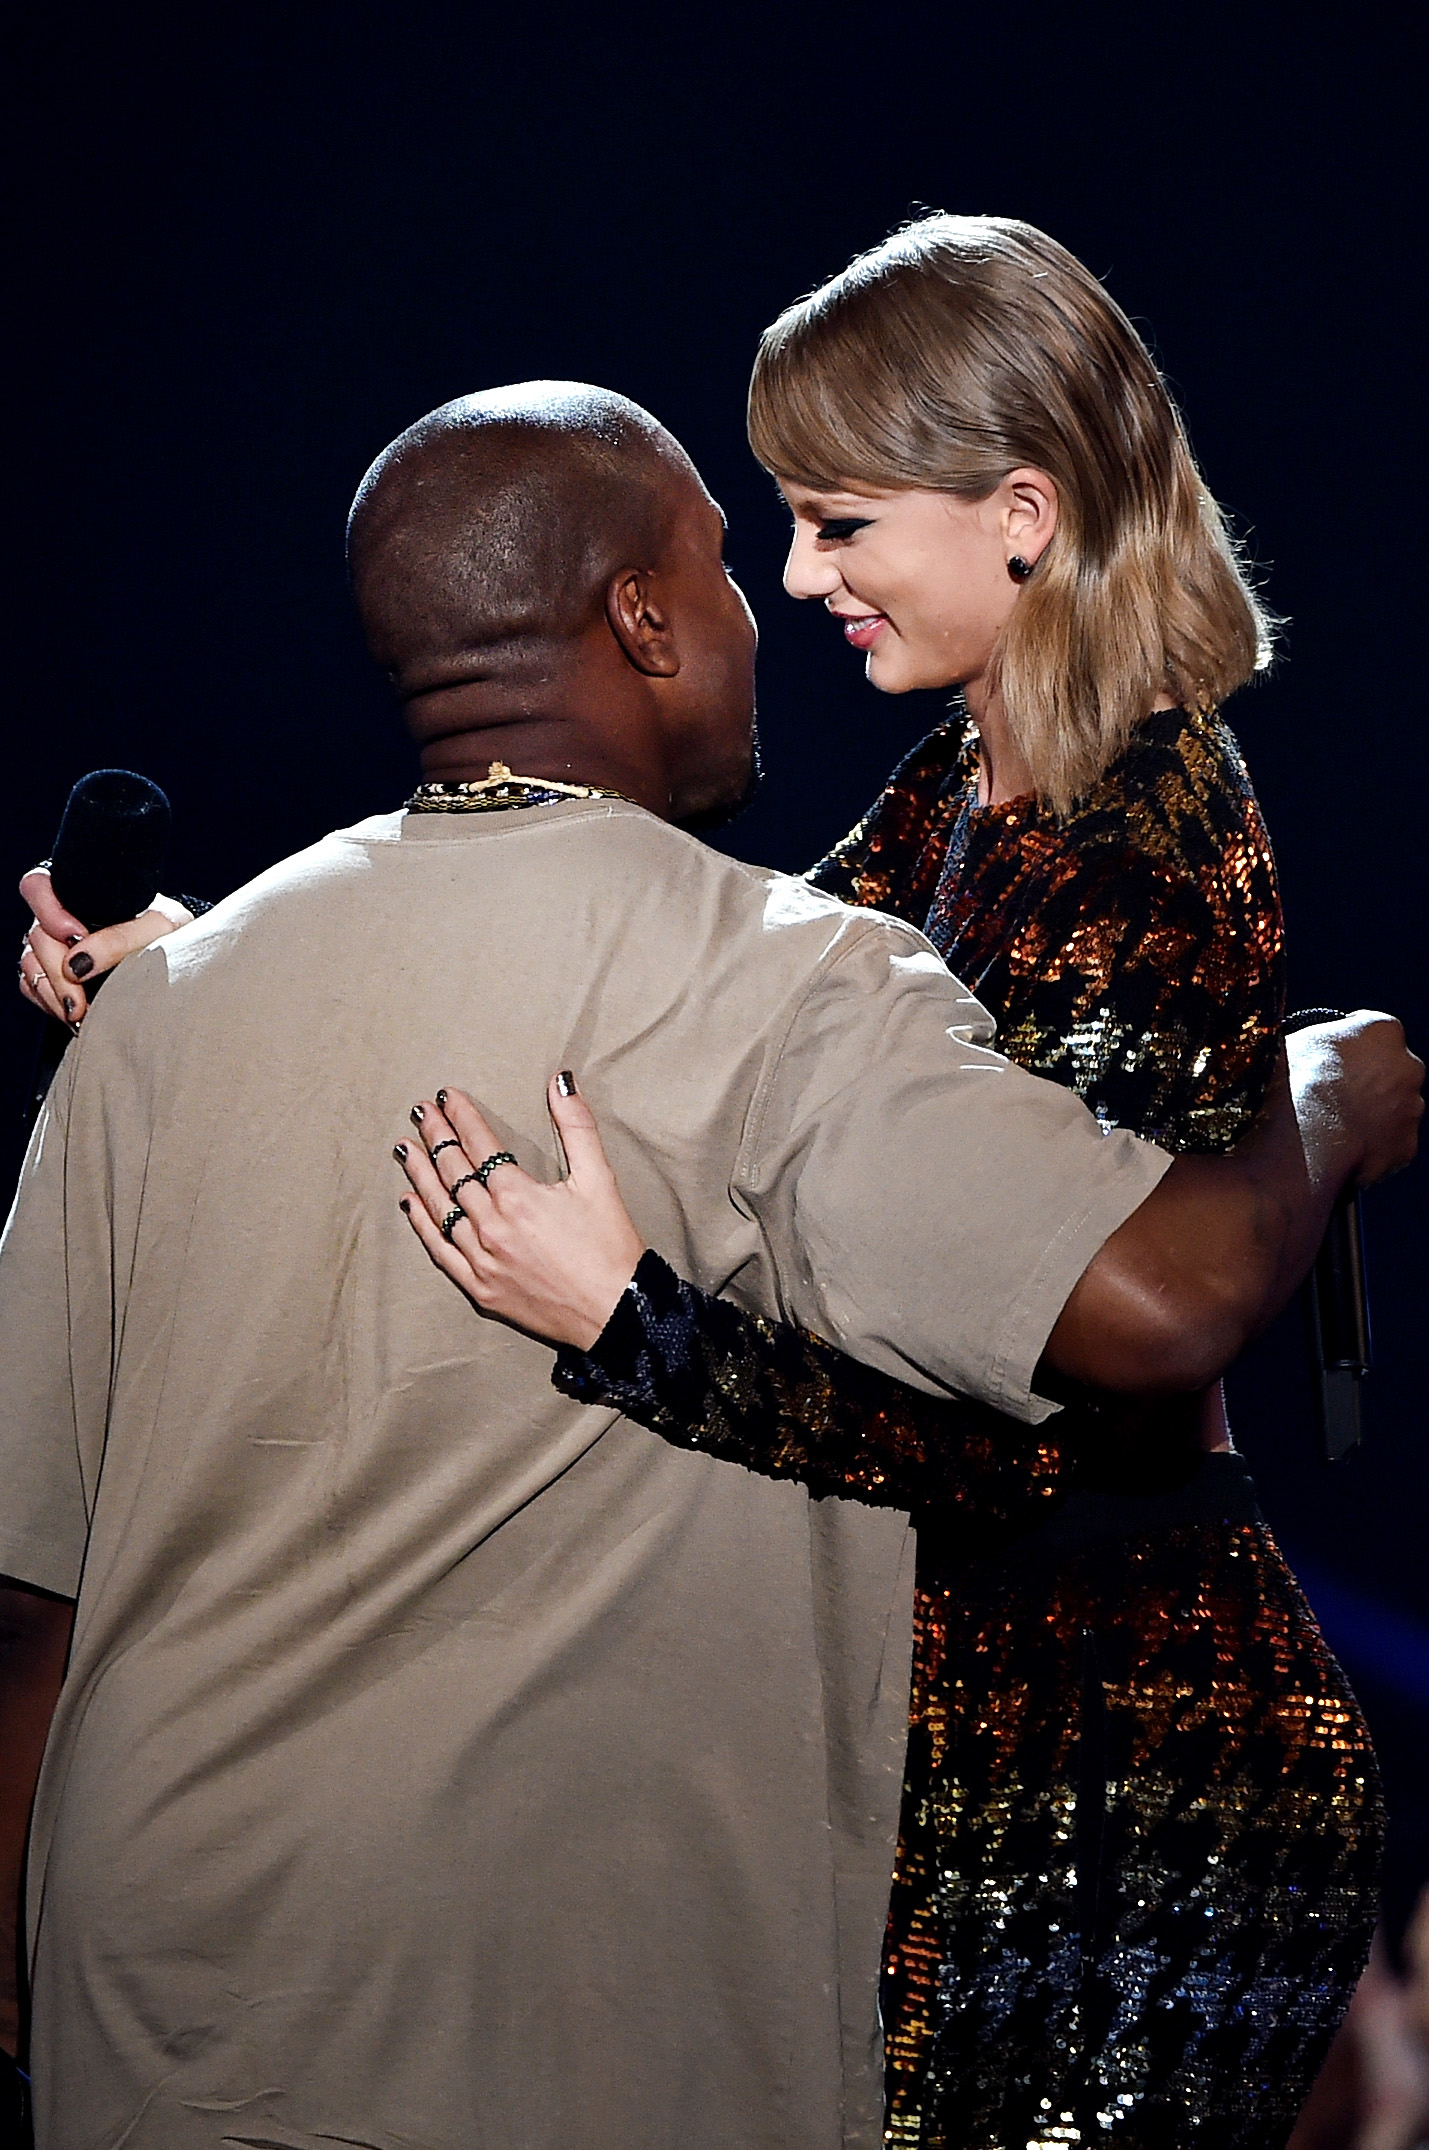 Ye and Taylor embracing